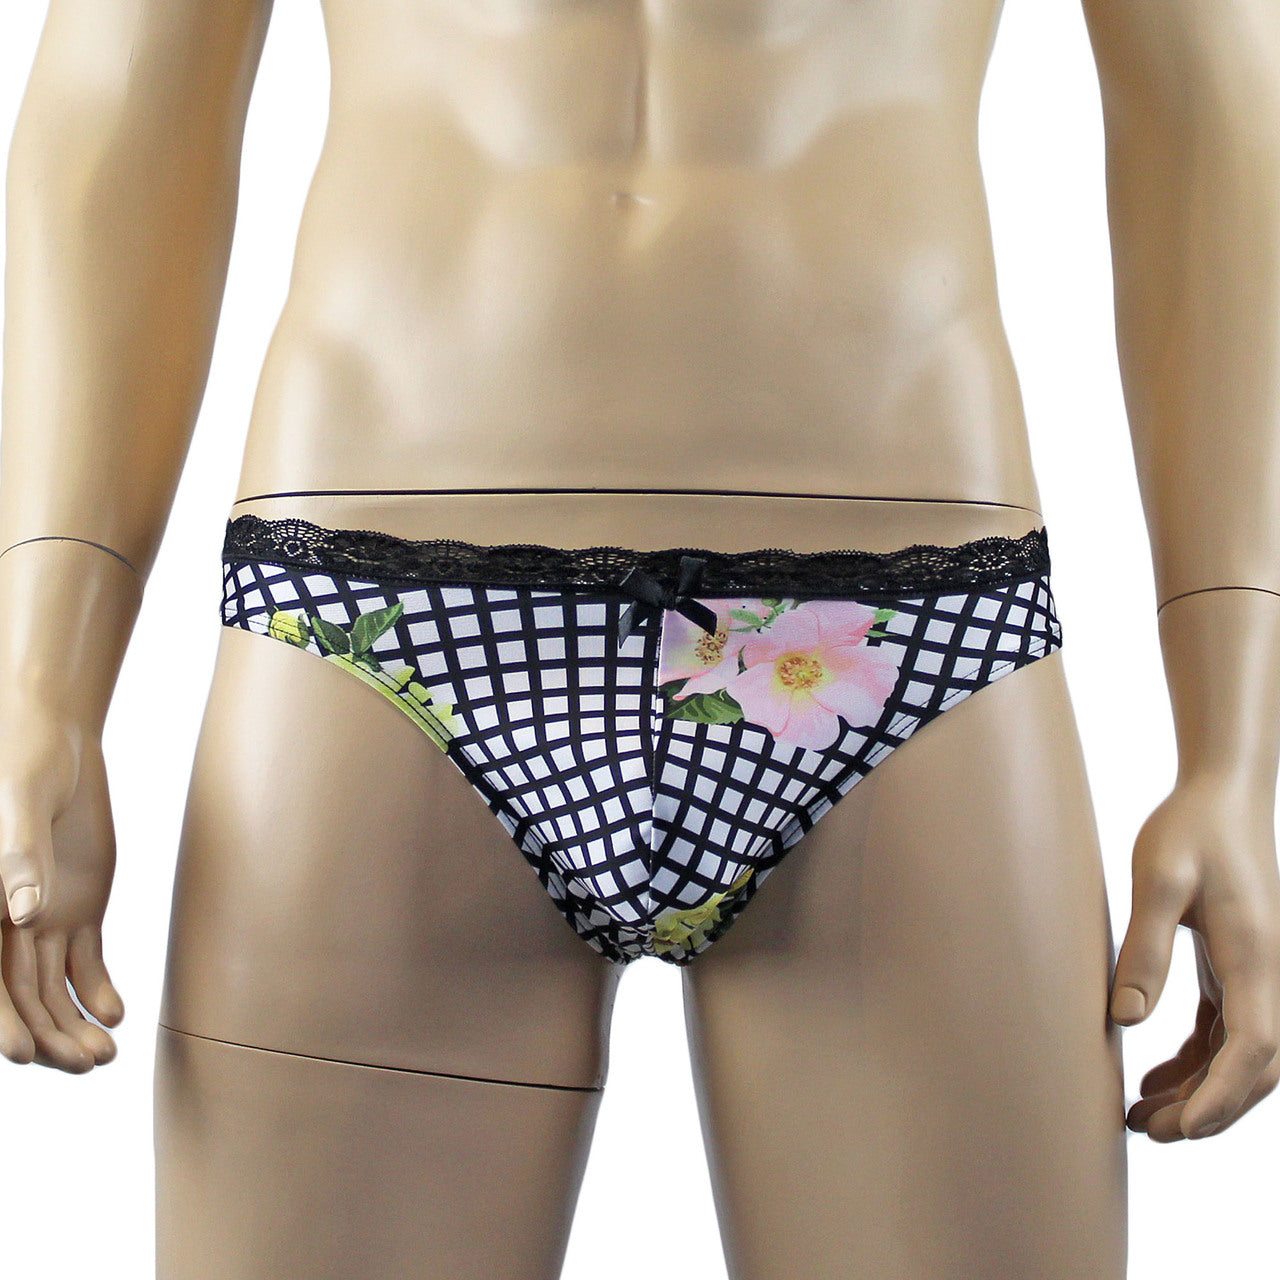 Mens Diana G string Thong in a Flower, Checkered Print Spandex